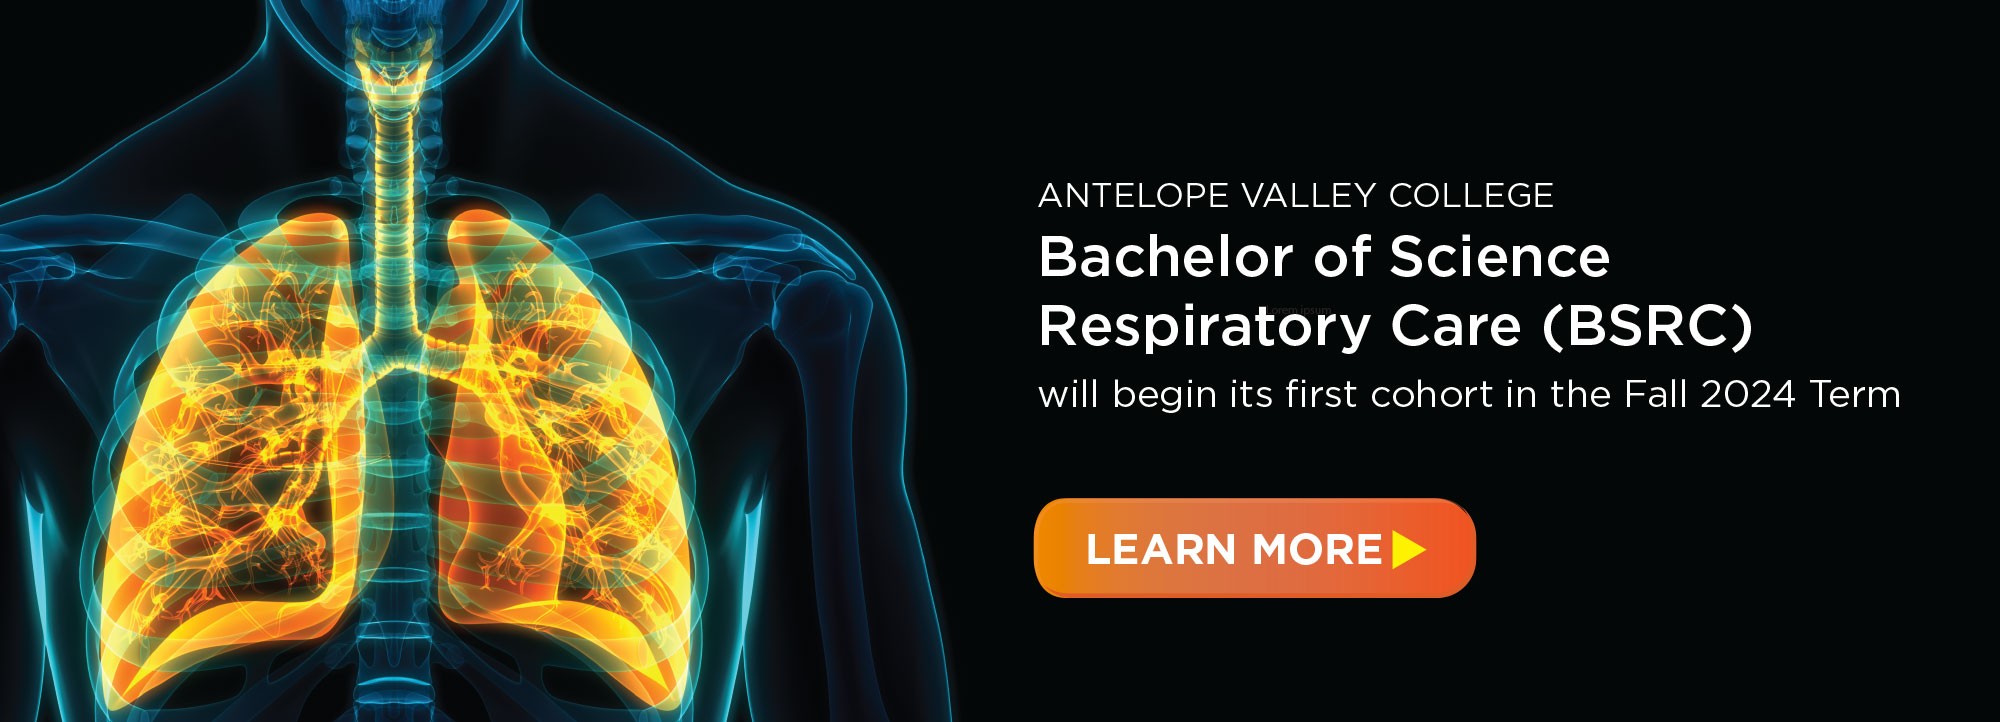 Bachelor of Science Respiratory Care will Begin in Fall 2024